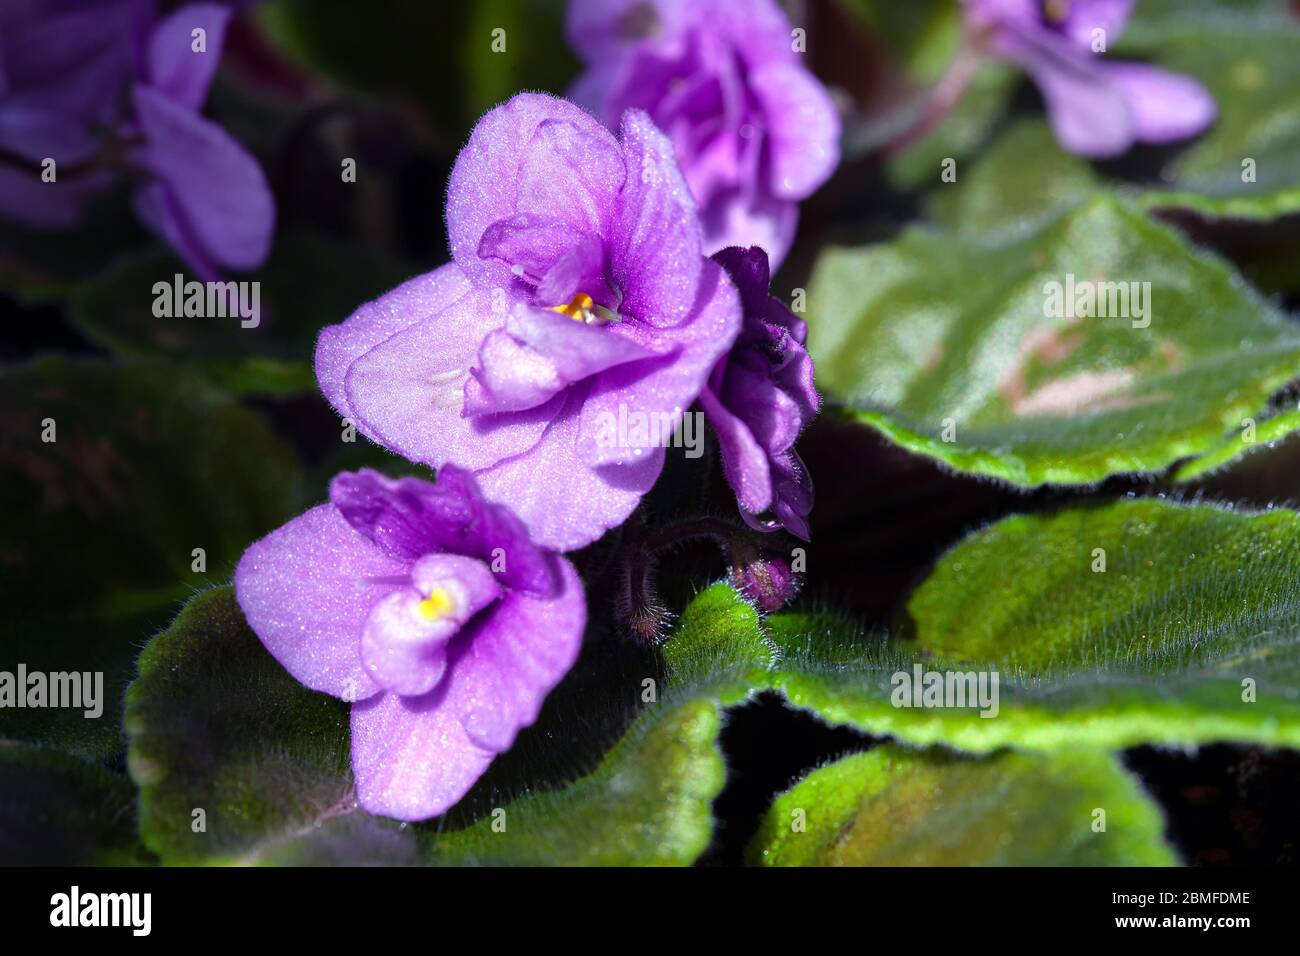 Blooming of African Violet Flowers with Green Leaves Stock Photo